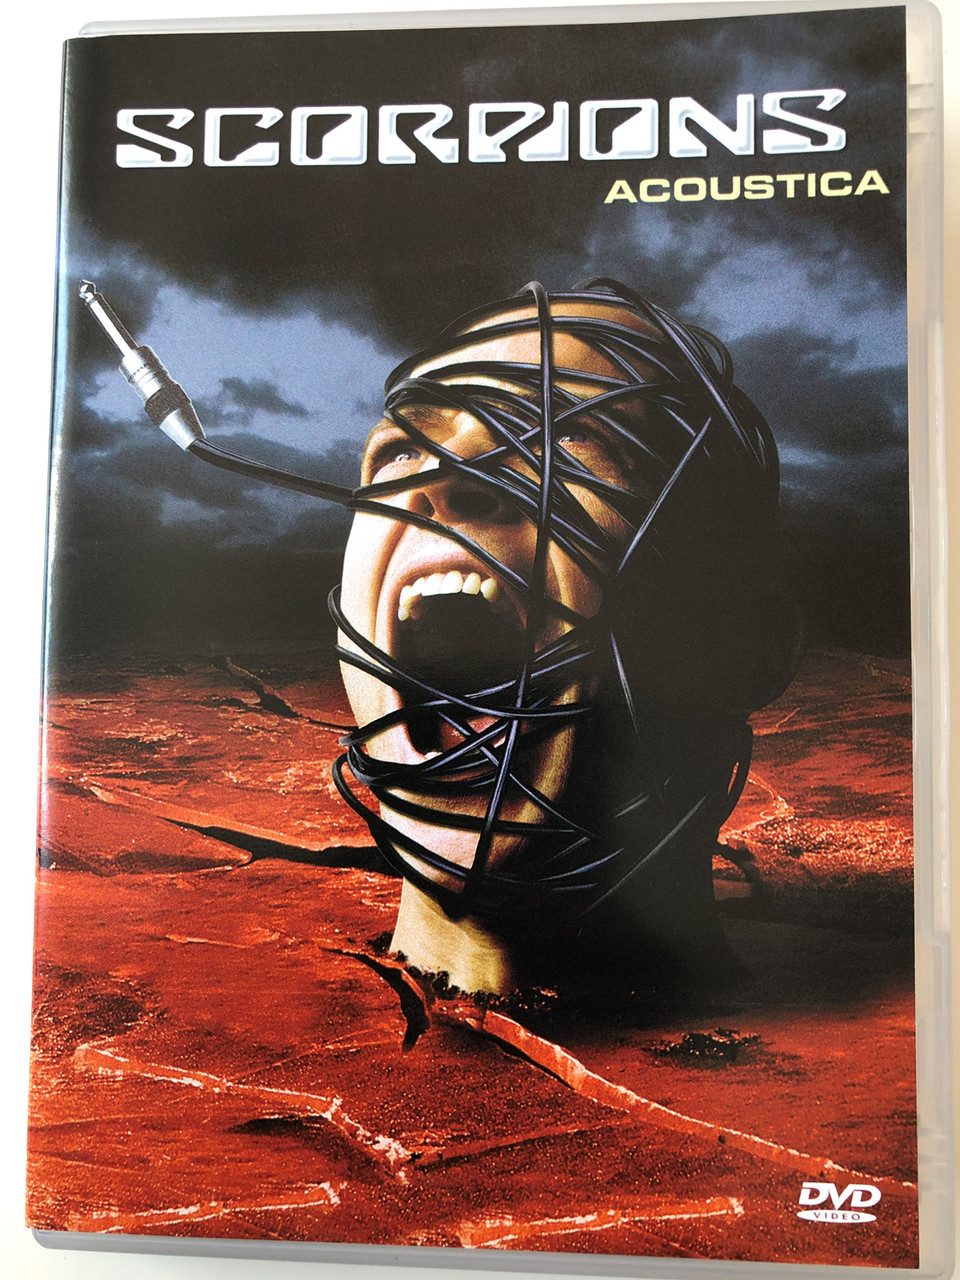 Scorpions - Acoustica DVD 2001 / The Zoo, Life is too Short, Dust in the  Wind, Wind of Change, Drive / Warner Music Vision / Special Features:  Making of, Interviews - bibleinmylanguage